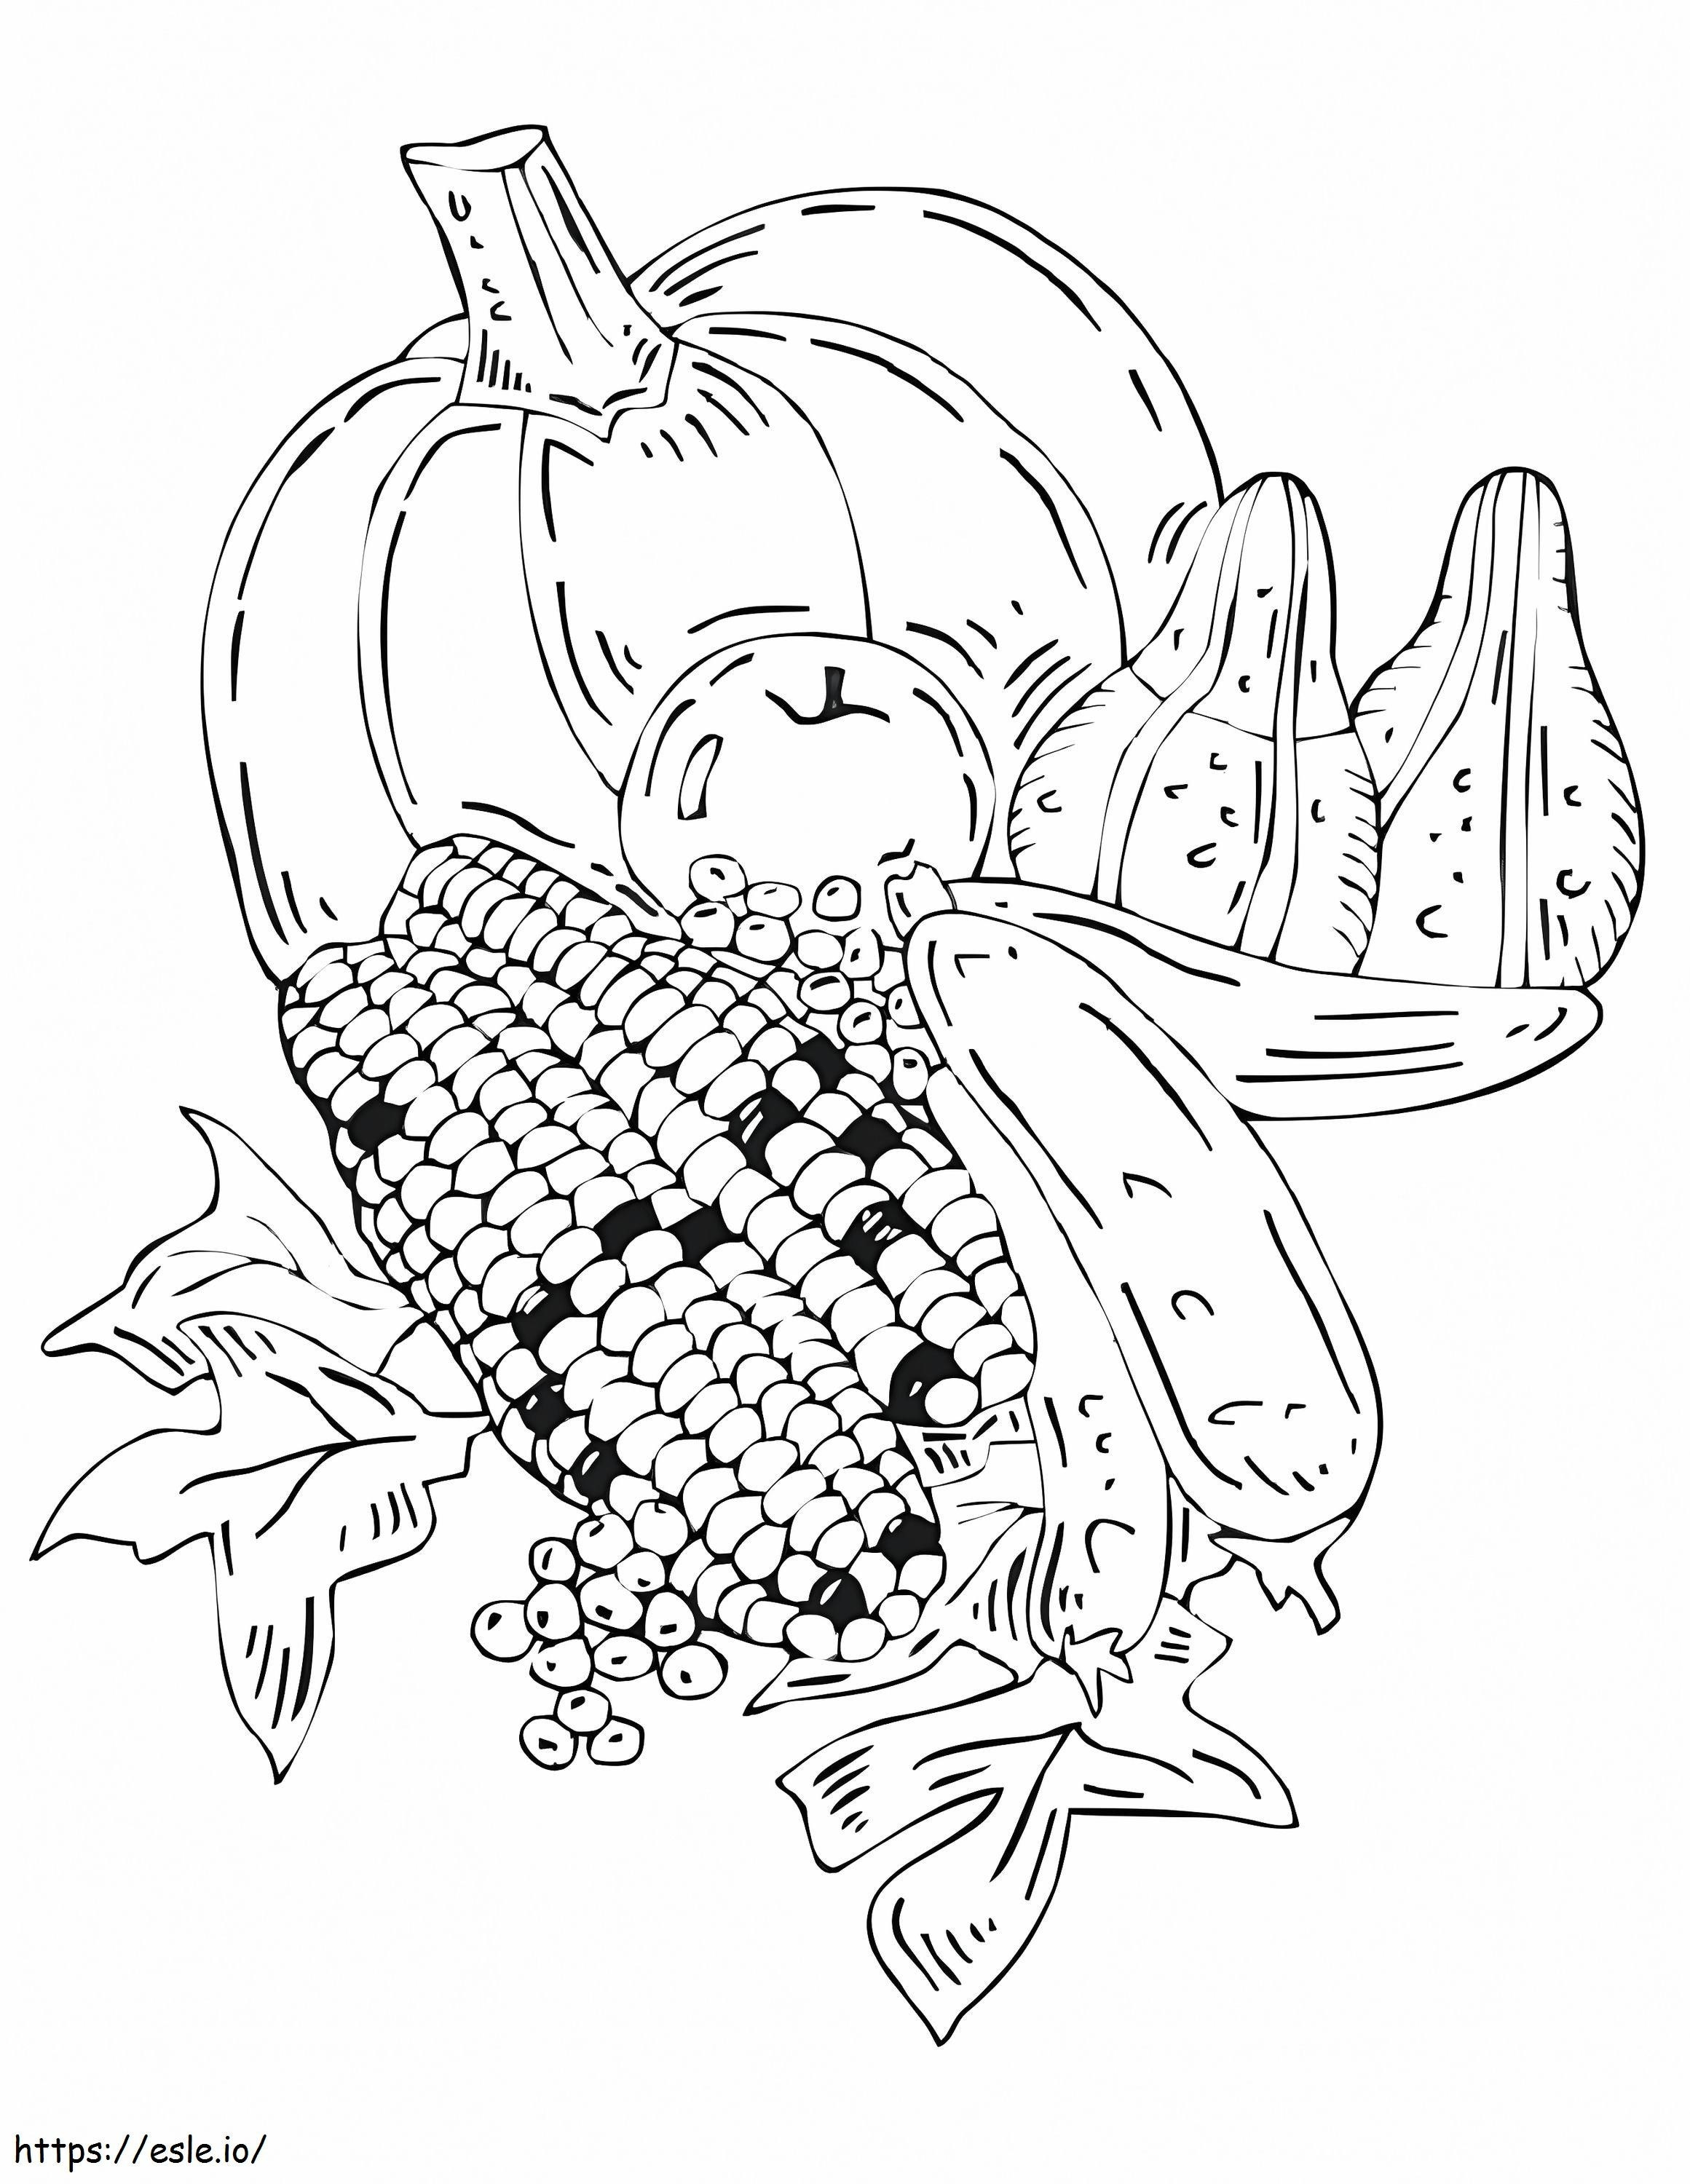 Harvest 5 coloring page